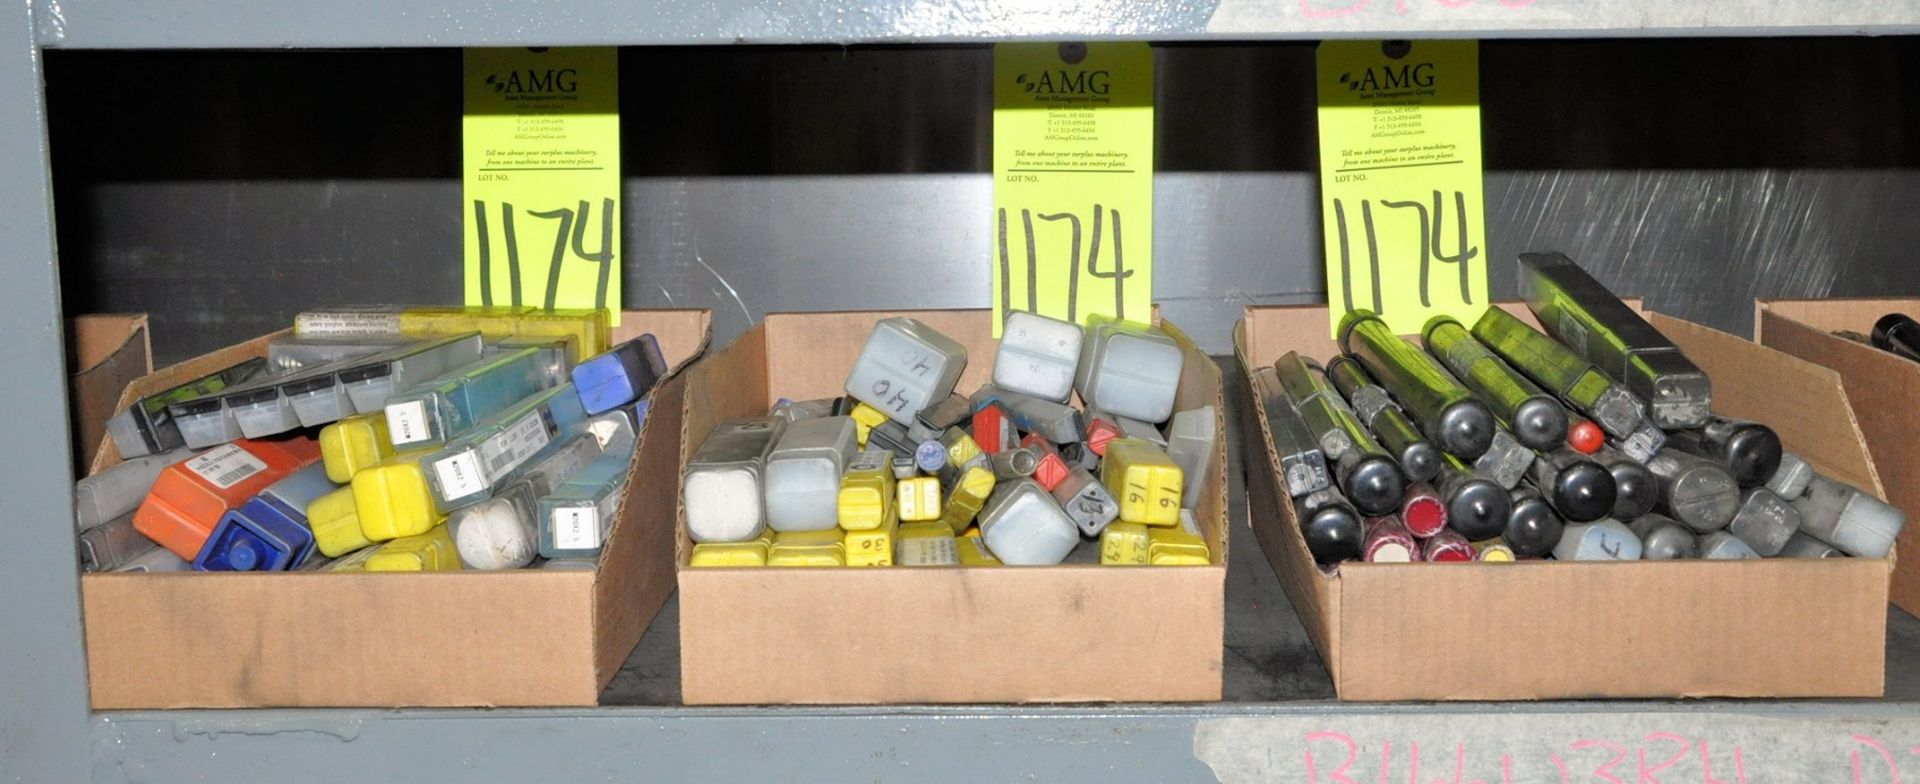 Lot-Packaged Cutters in (3) Boxes on (1) Shelf, (F-14), (Yellow Tag)